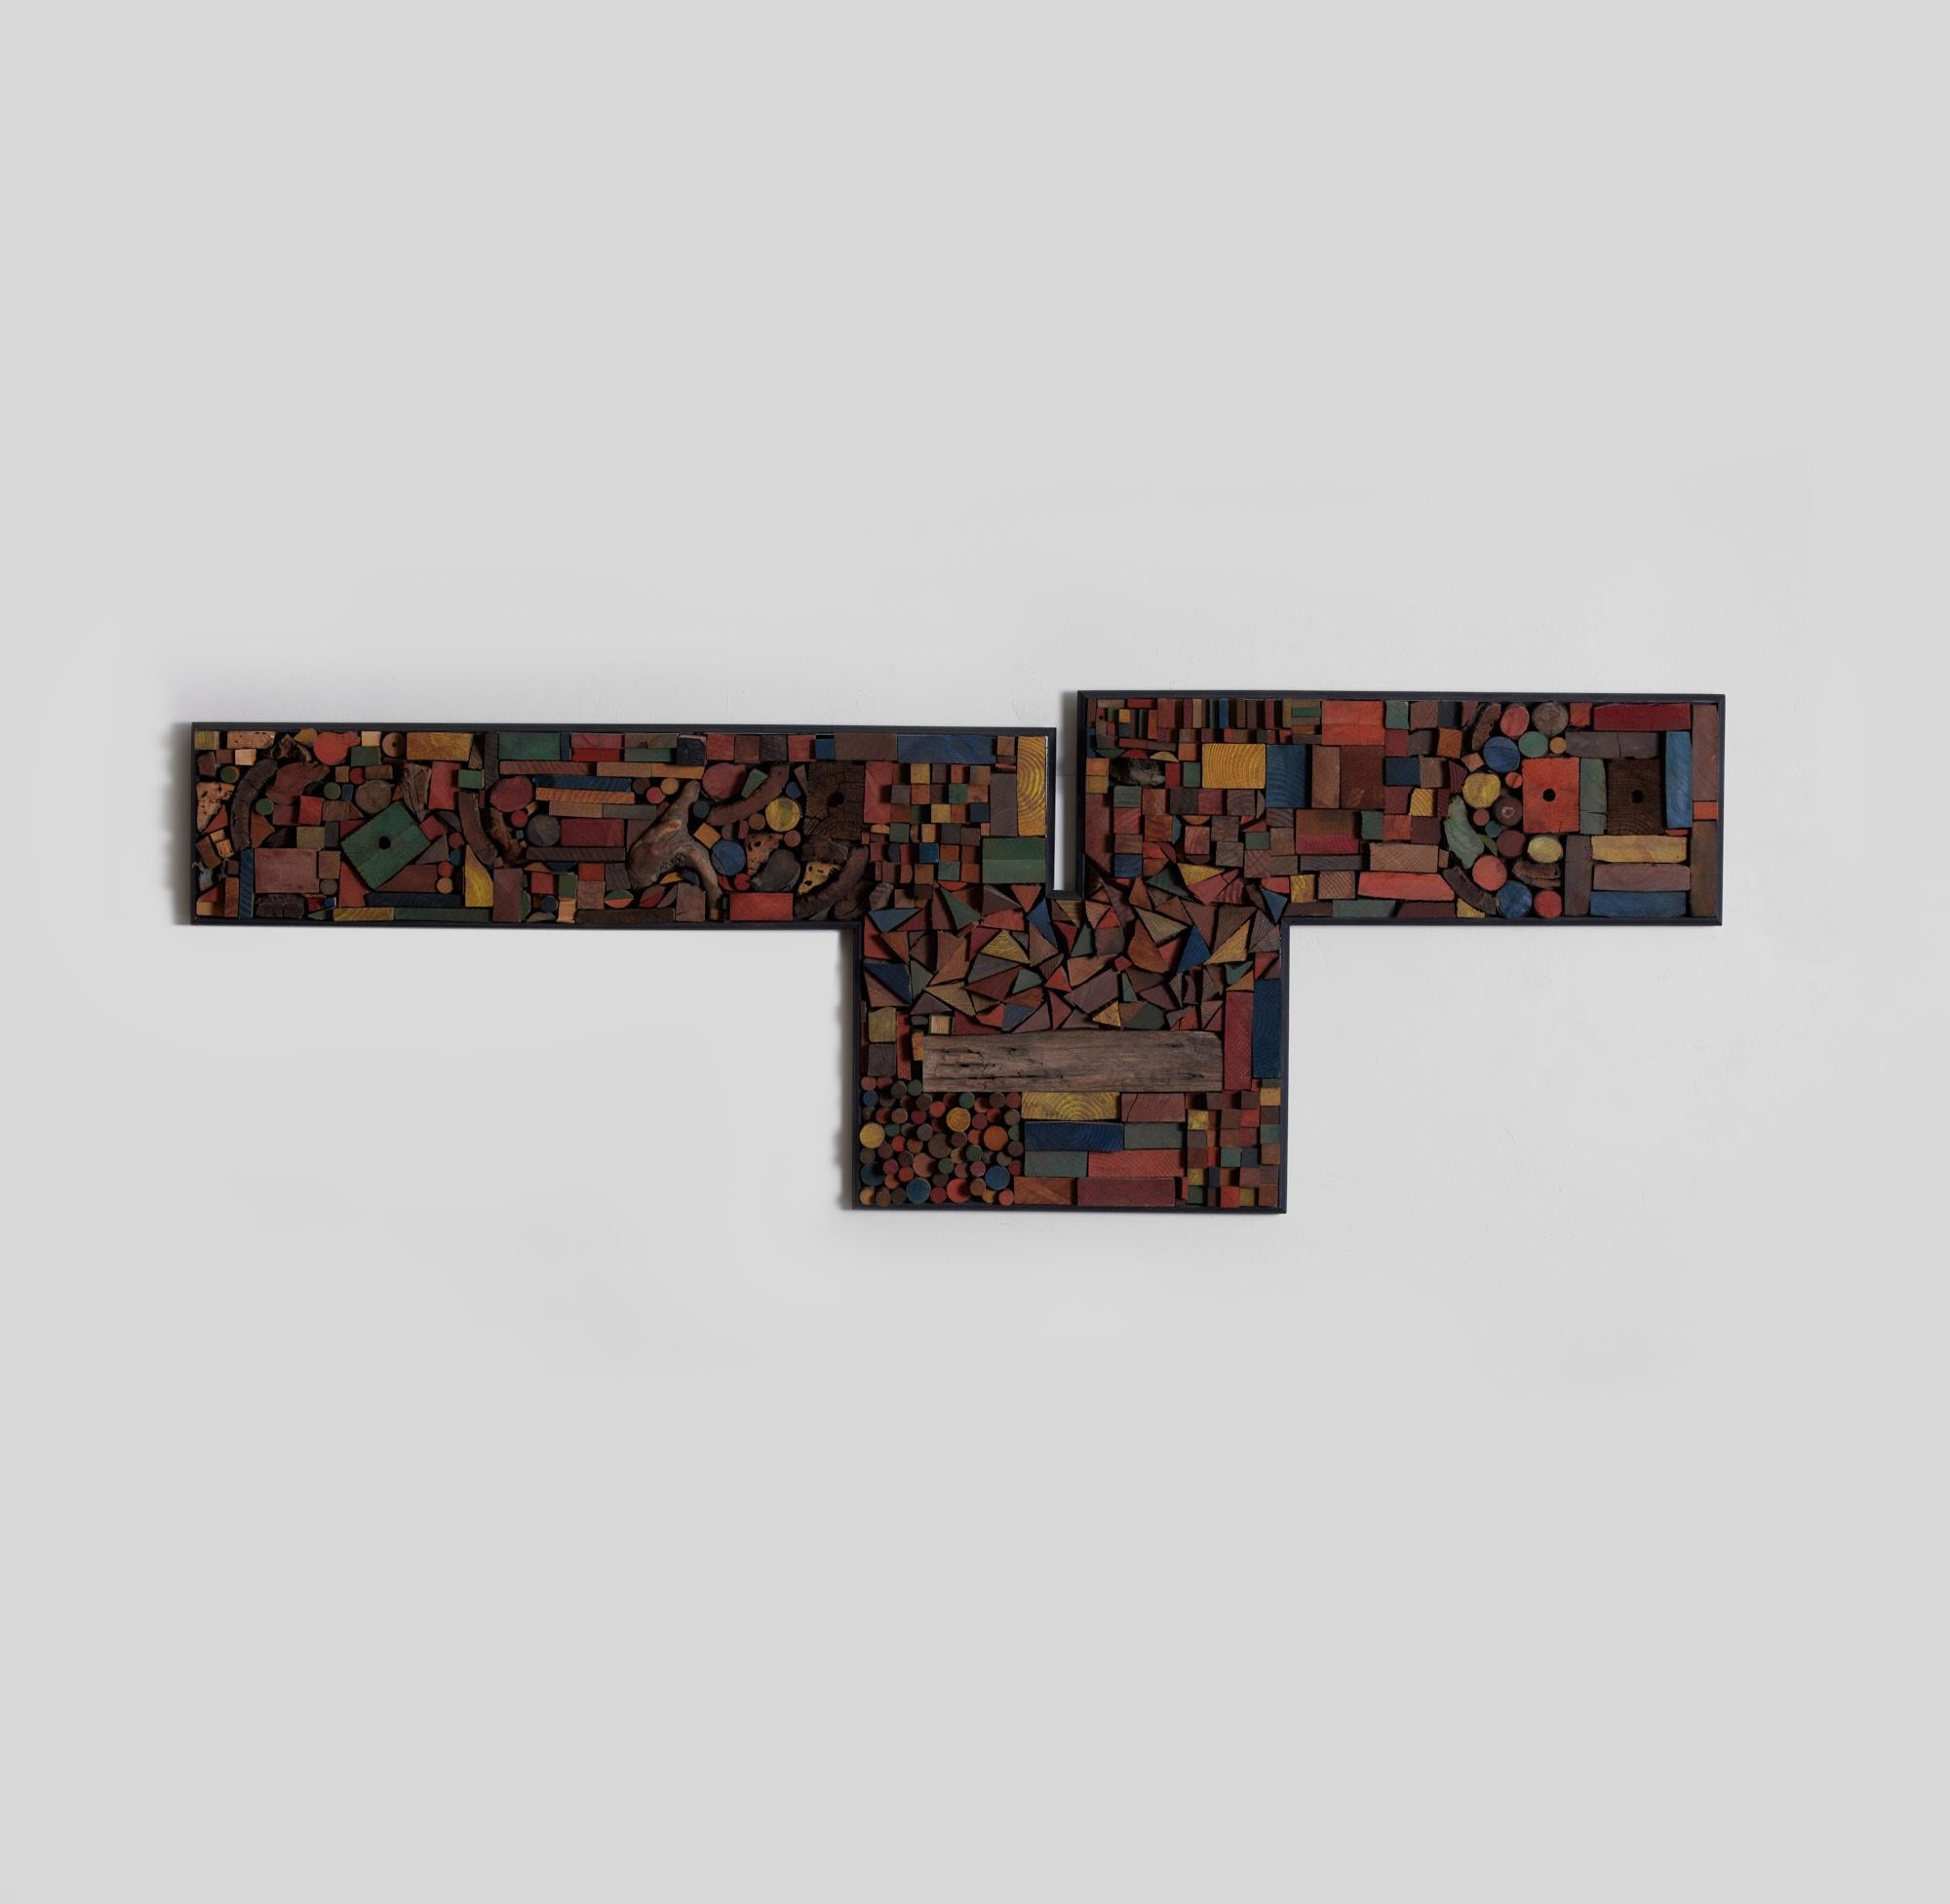 Mosaic wood assemblage in the style of Mabel Hutchinson. This large scale wall piece features a mix of earth tone and bright primary colored wood shapes inlayed to a wood frame. The framed pieces are irregularly cut and tightly arranged into a